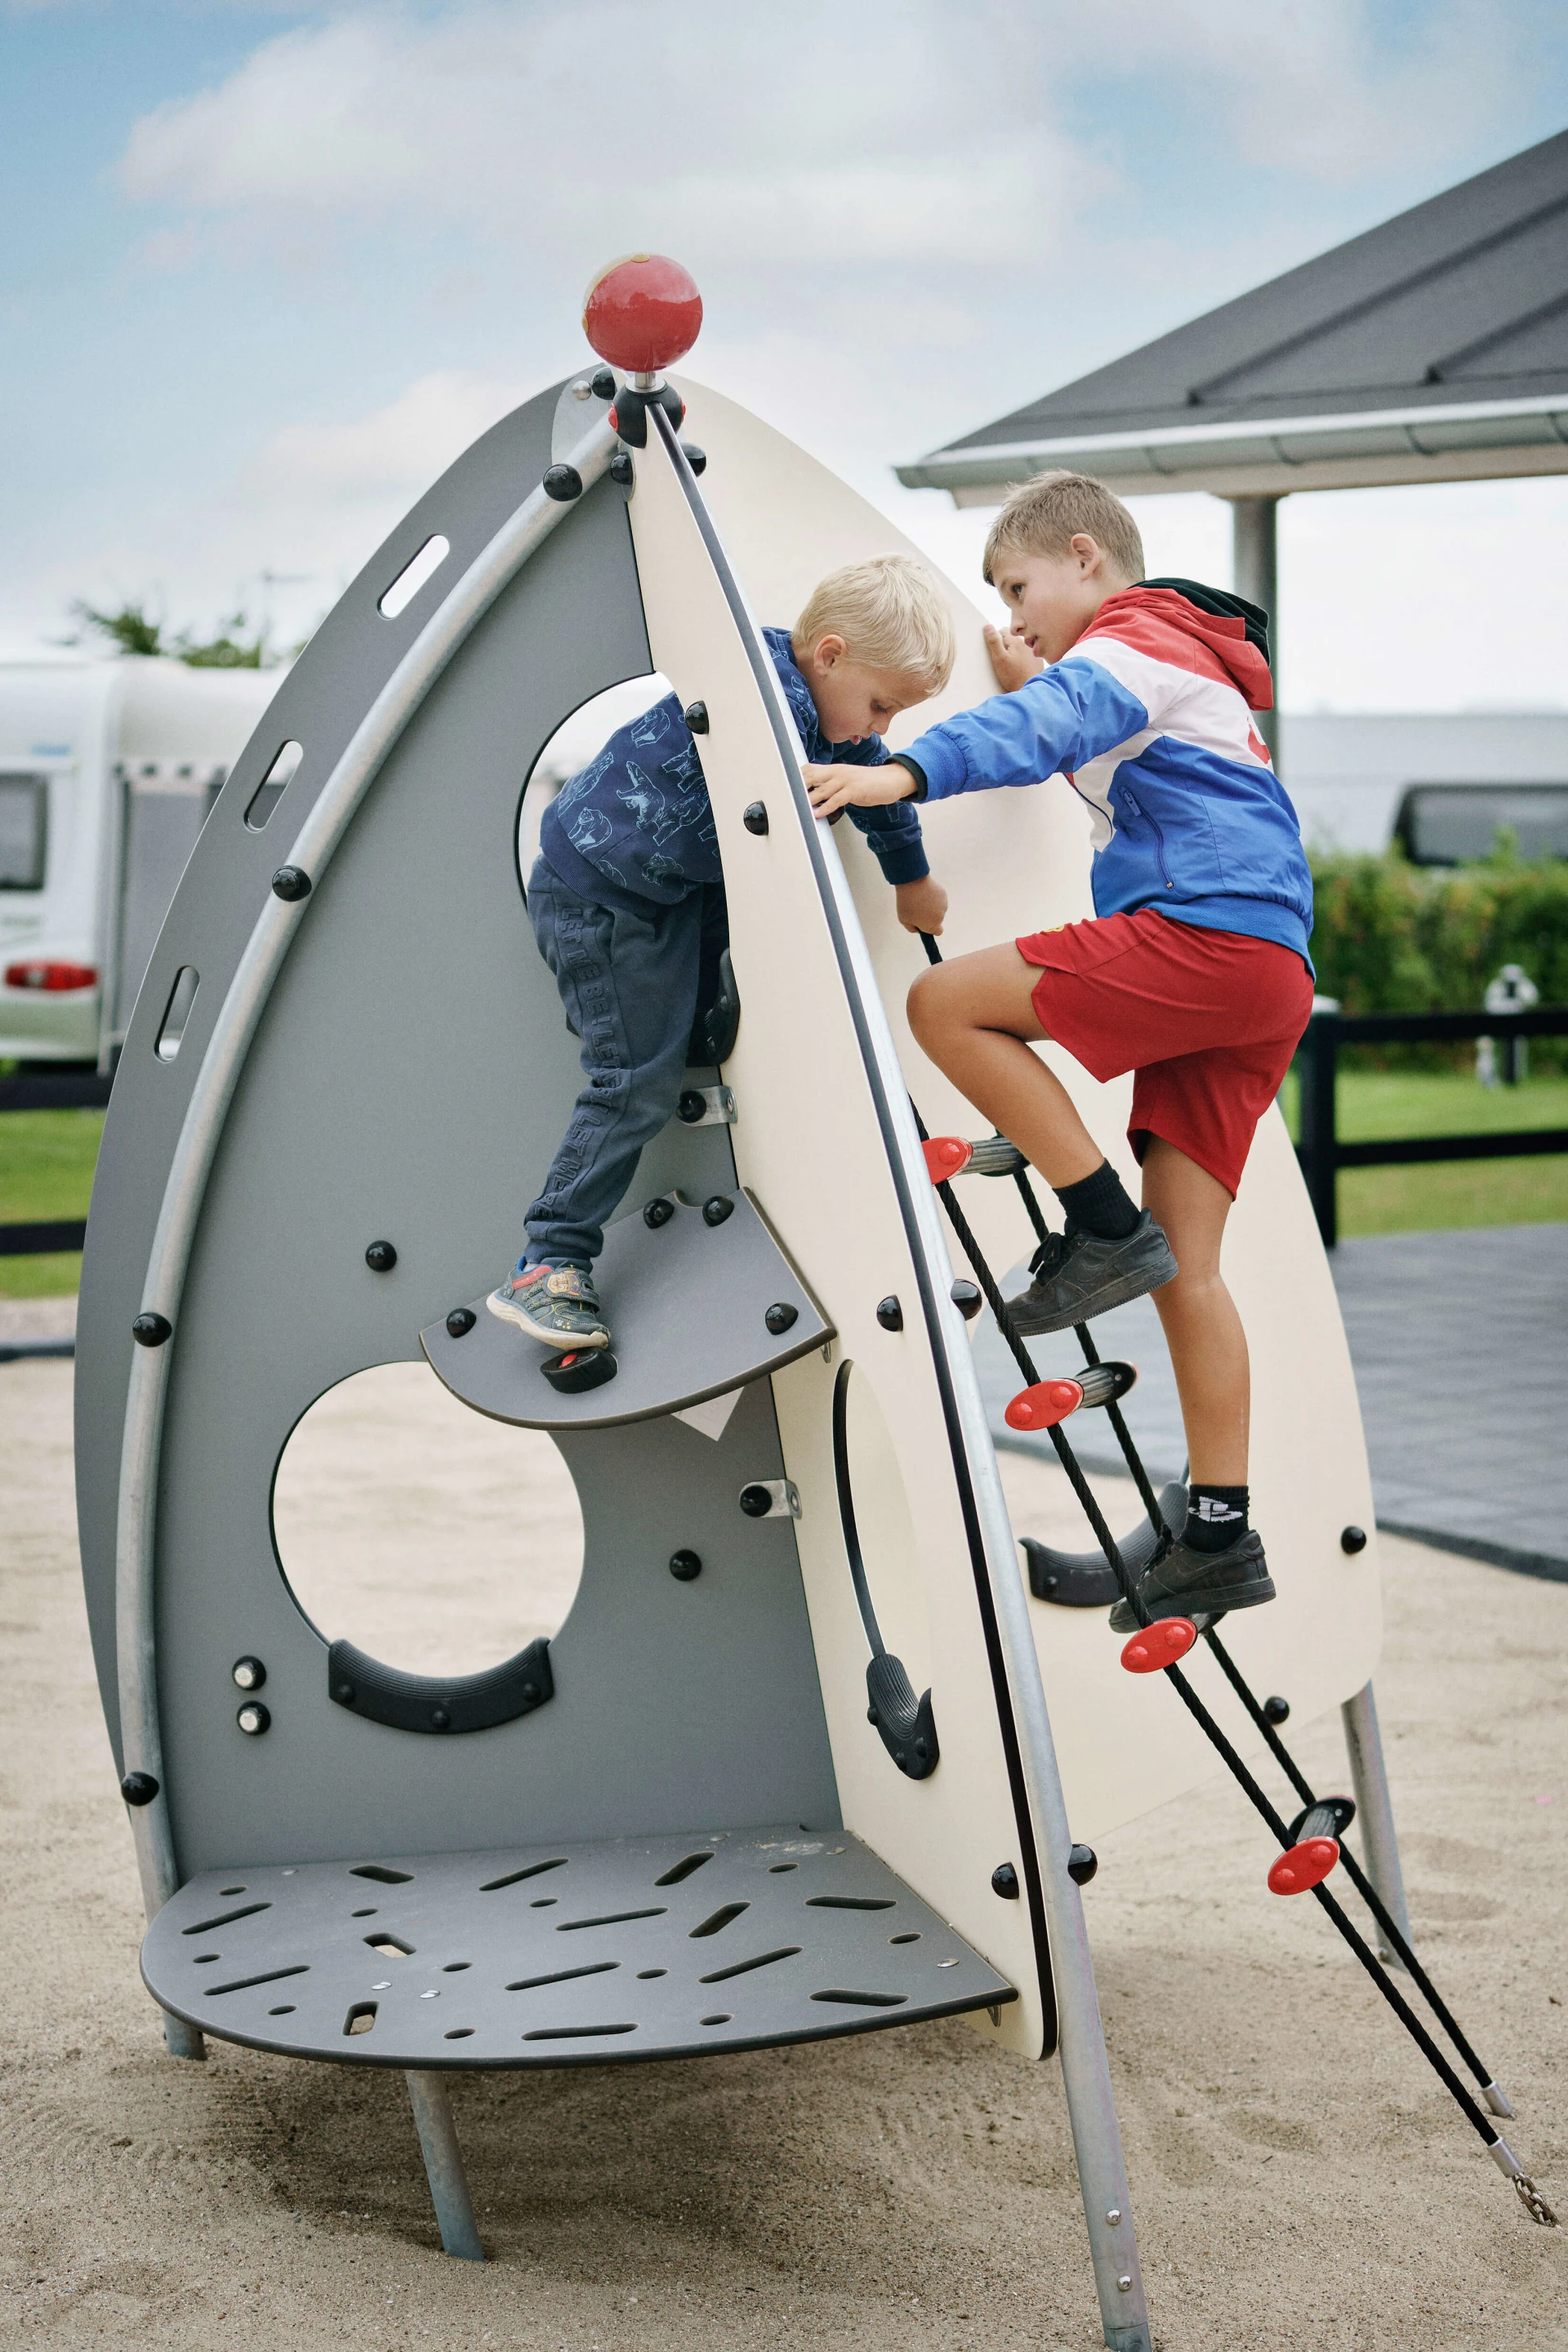 Kids climbing over space themed playground equipment at CampOne camping